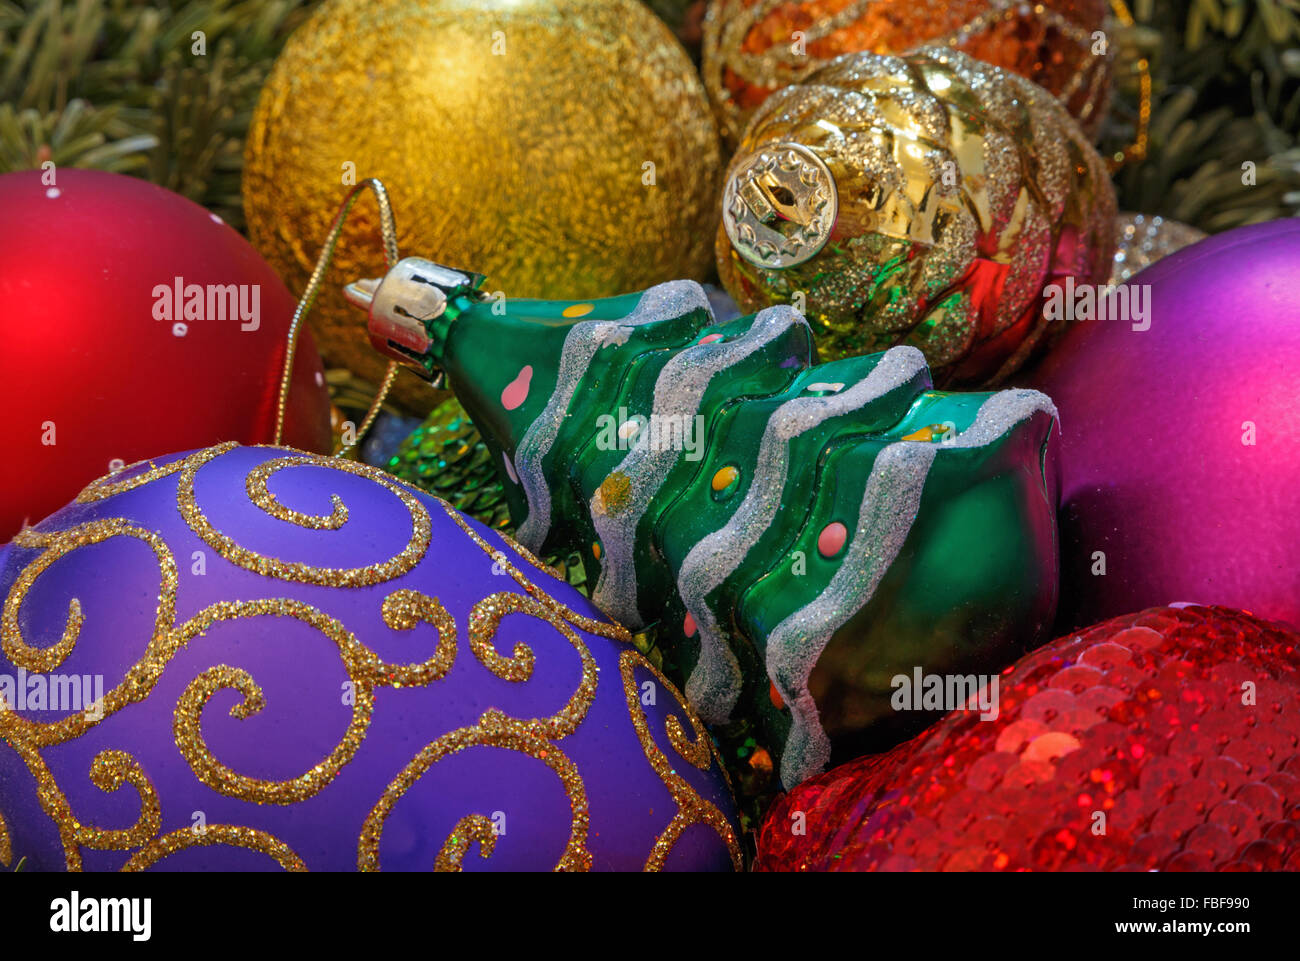 close up of Christmas tree ornaments Stock Photo